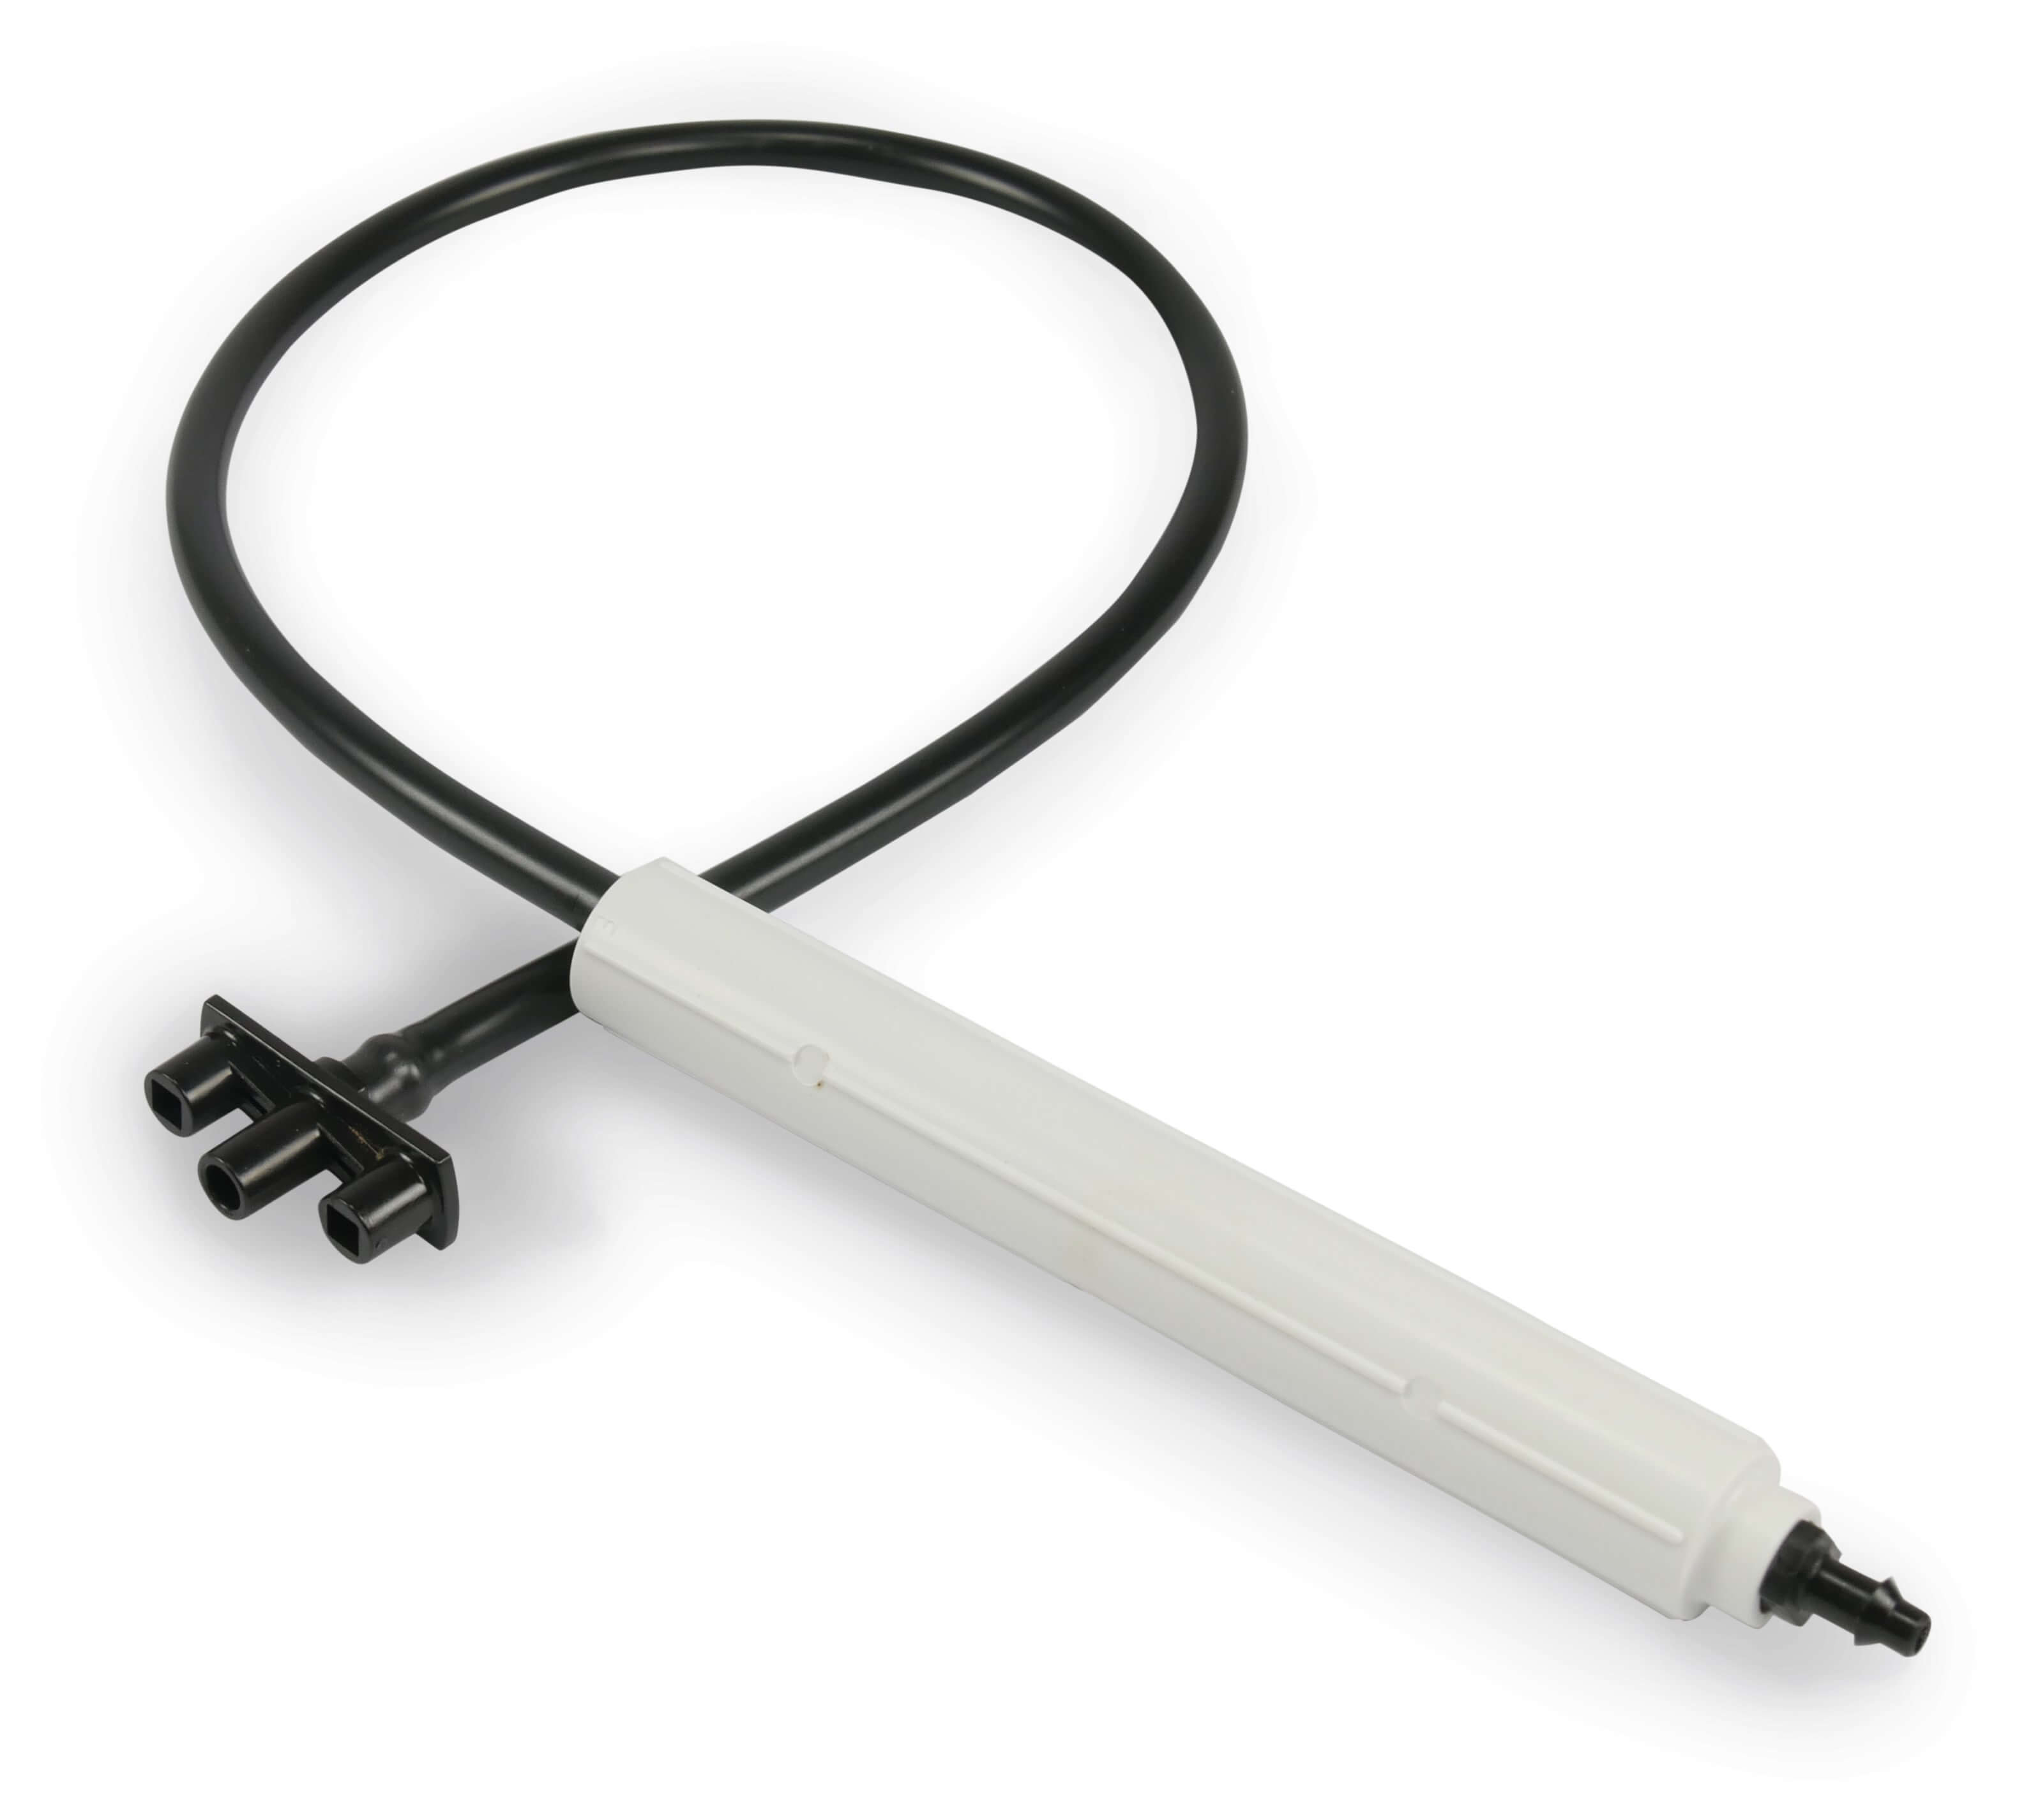 NaanDanJain Suspended stand with stabilizer plastic 4/7 mm taper M x push-in 30cm black/white